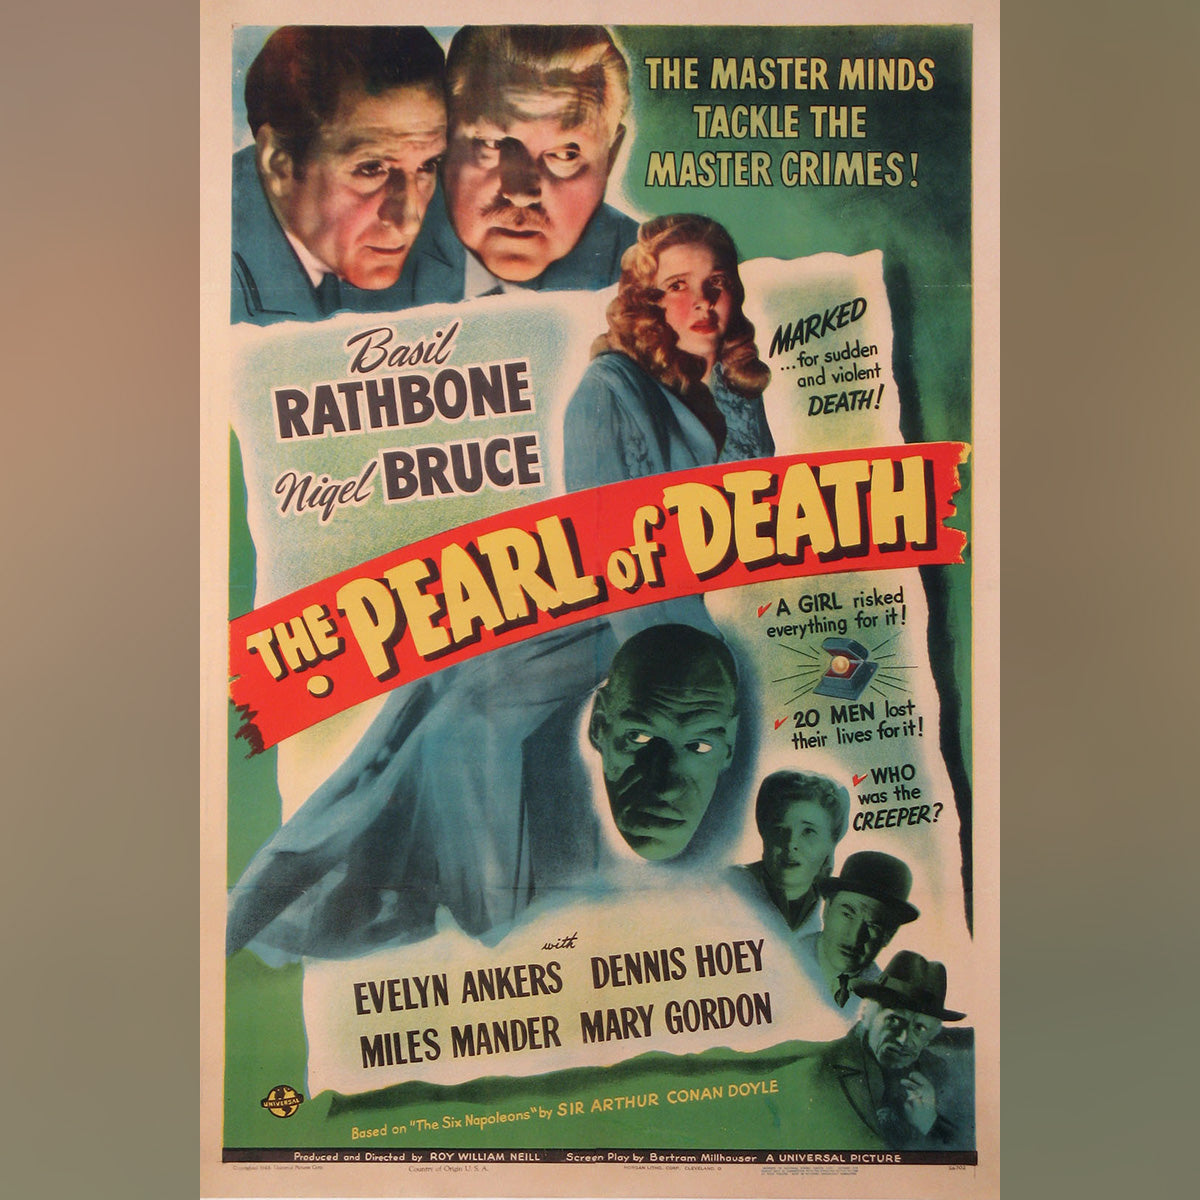 Original Movie Poster of Pearl Of Death, The (1944)